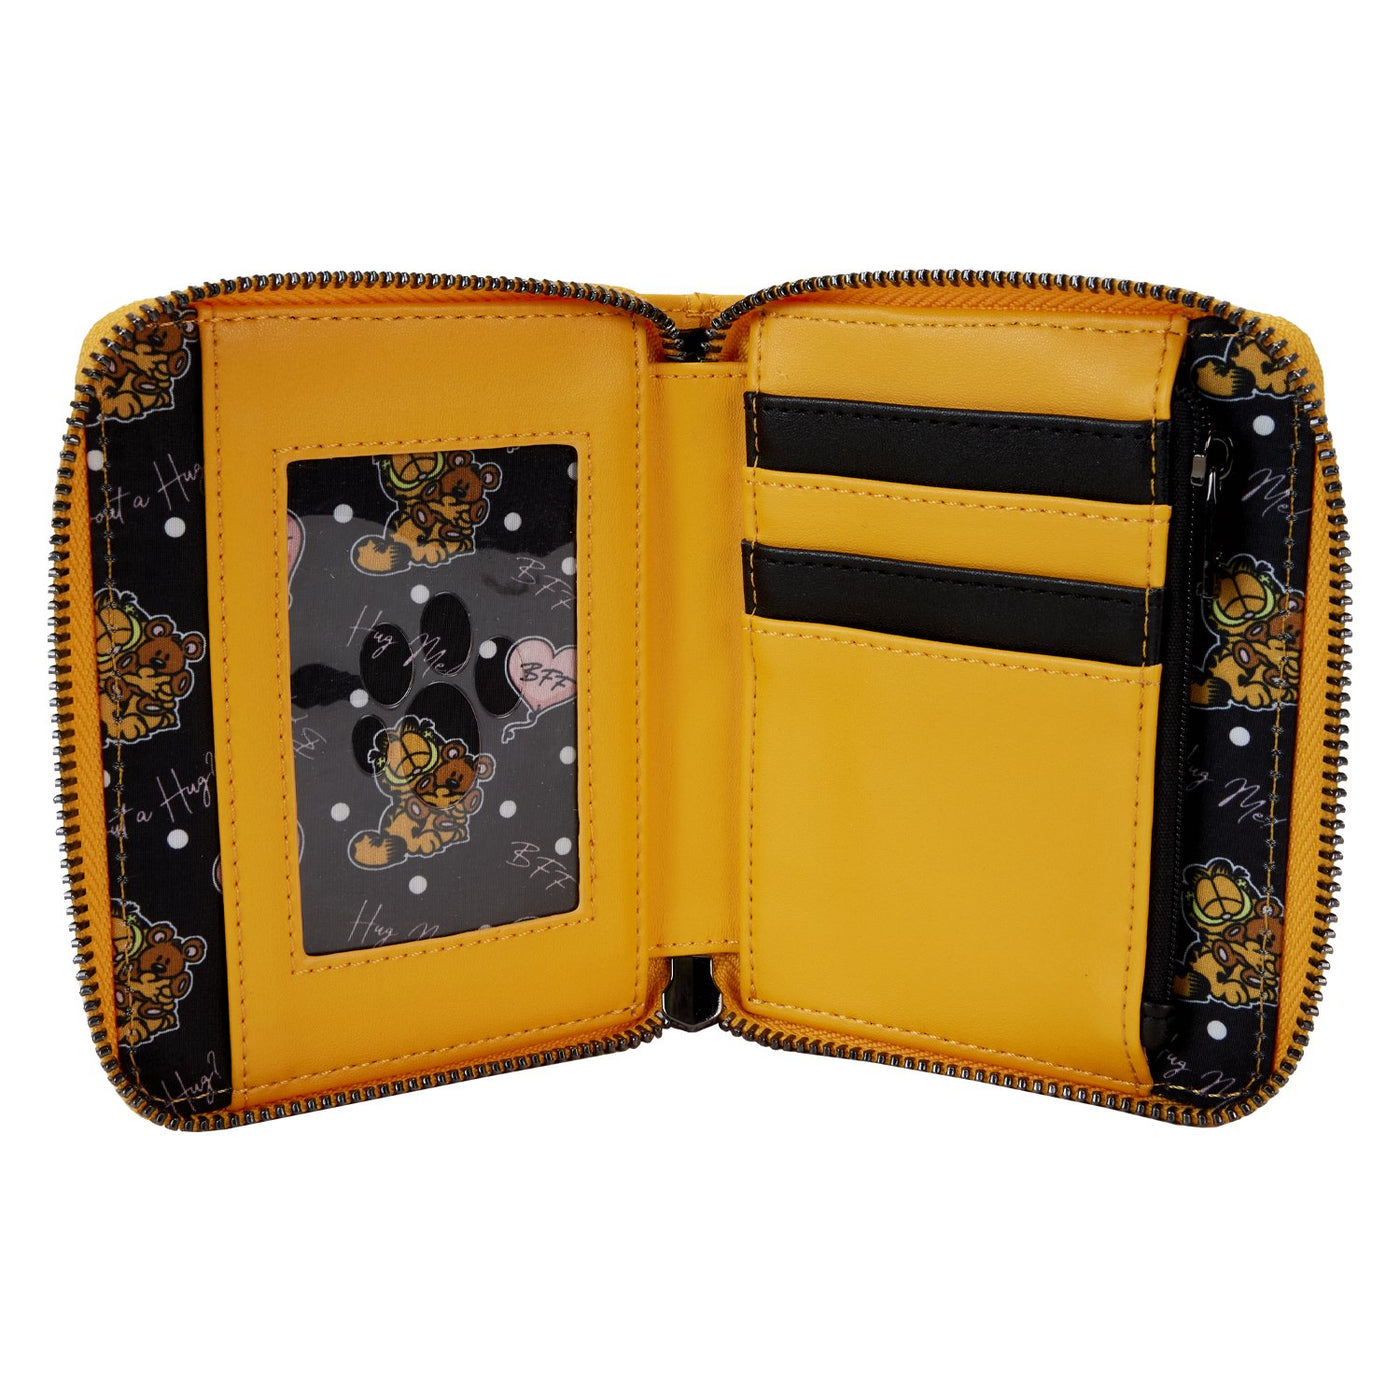 Loungefly Nickelodeon Garfield and Pooky Zip-Around Wallet - Interior View